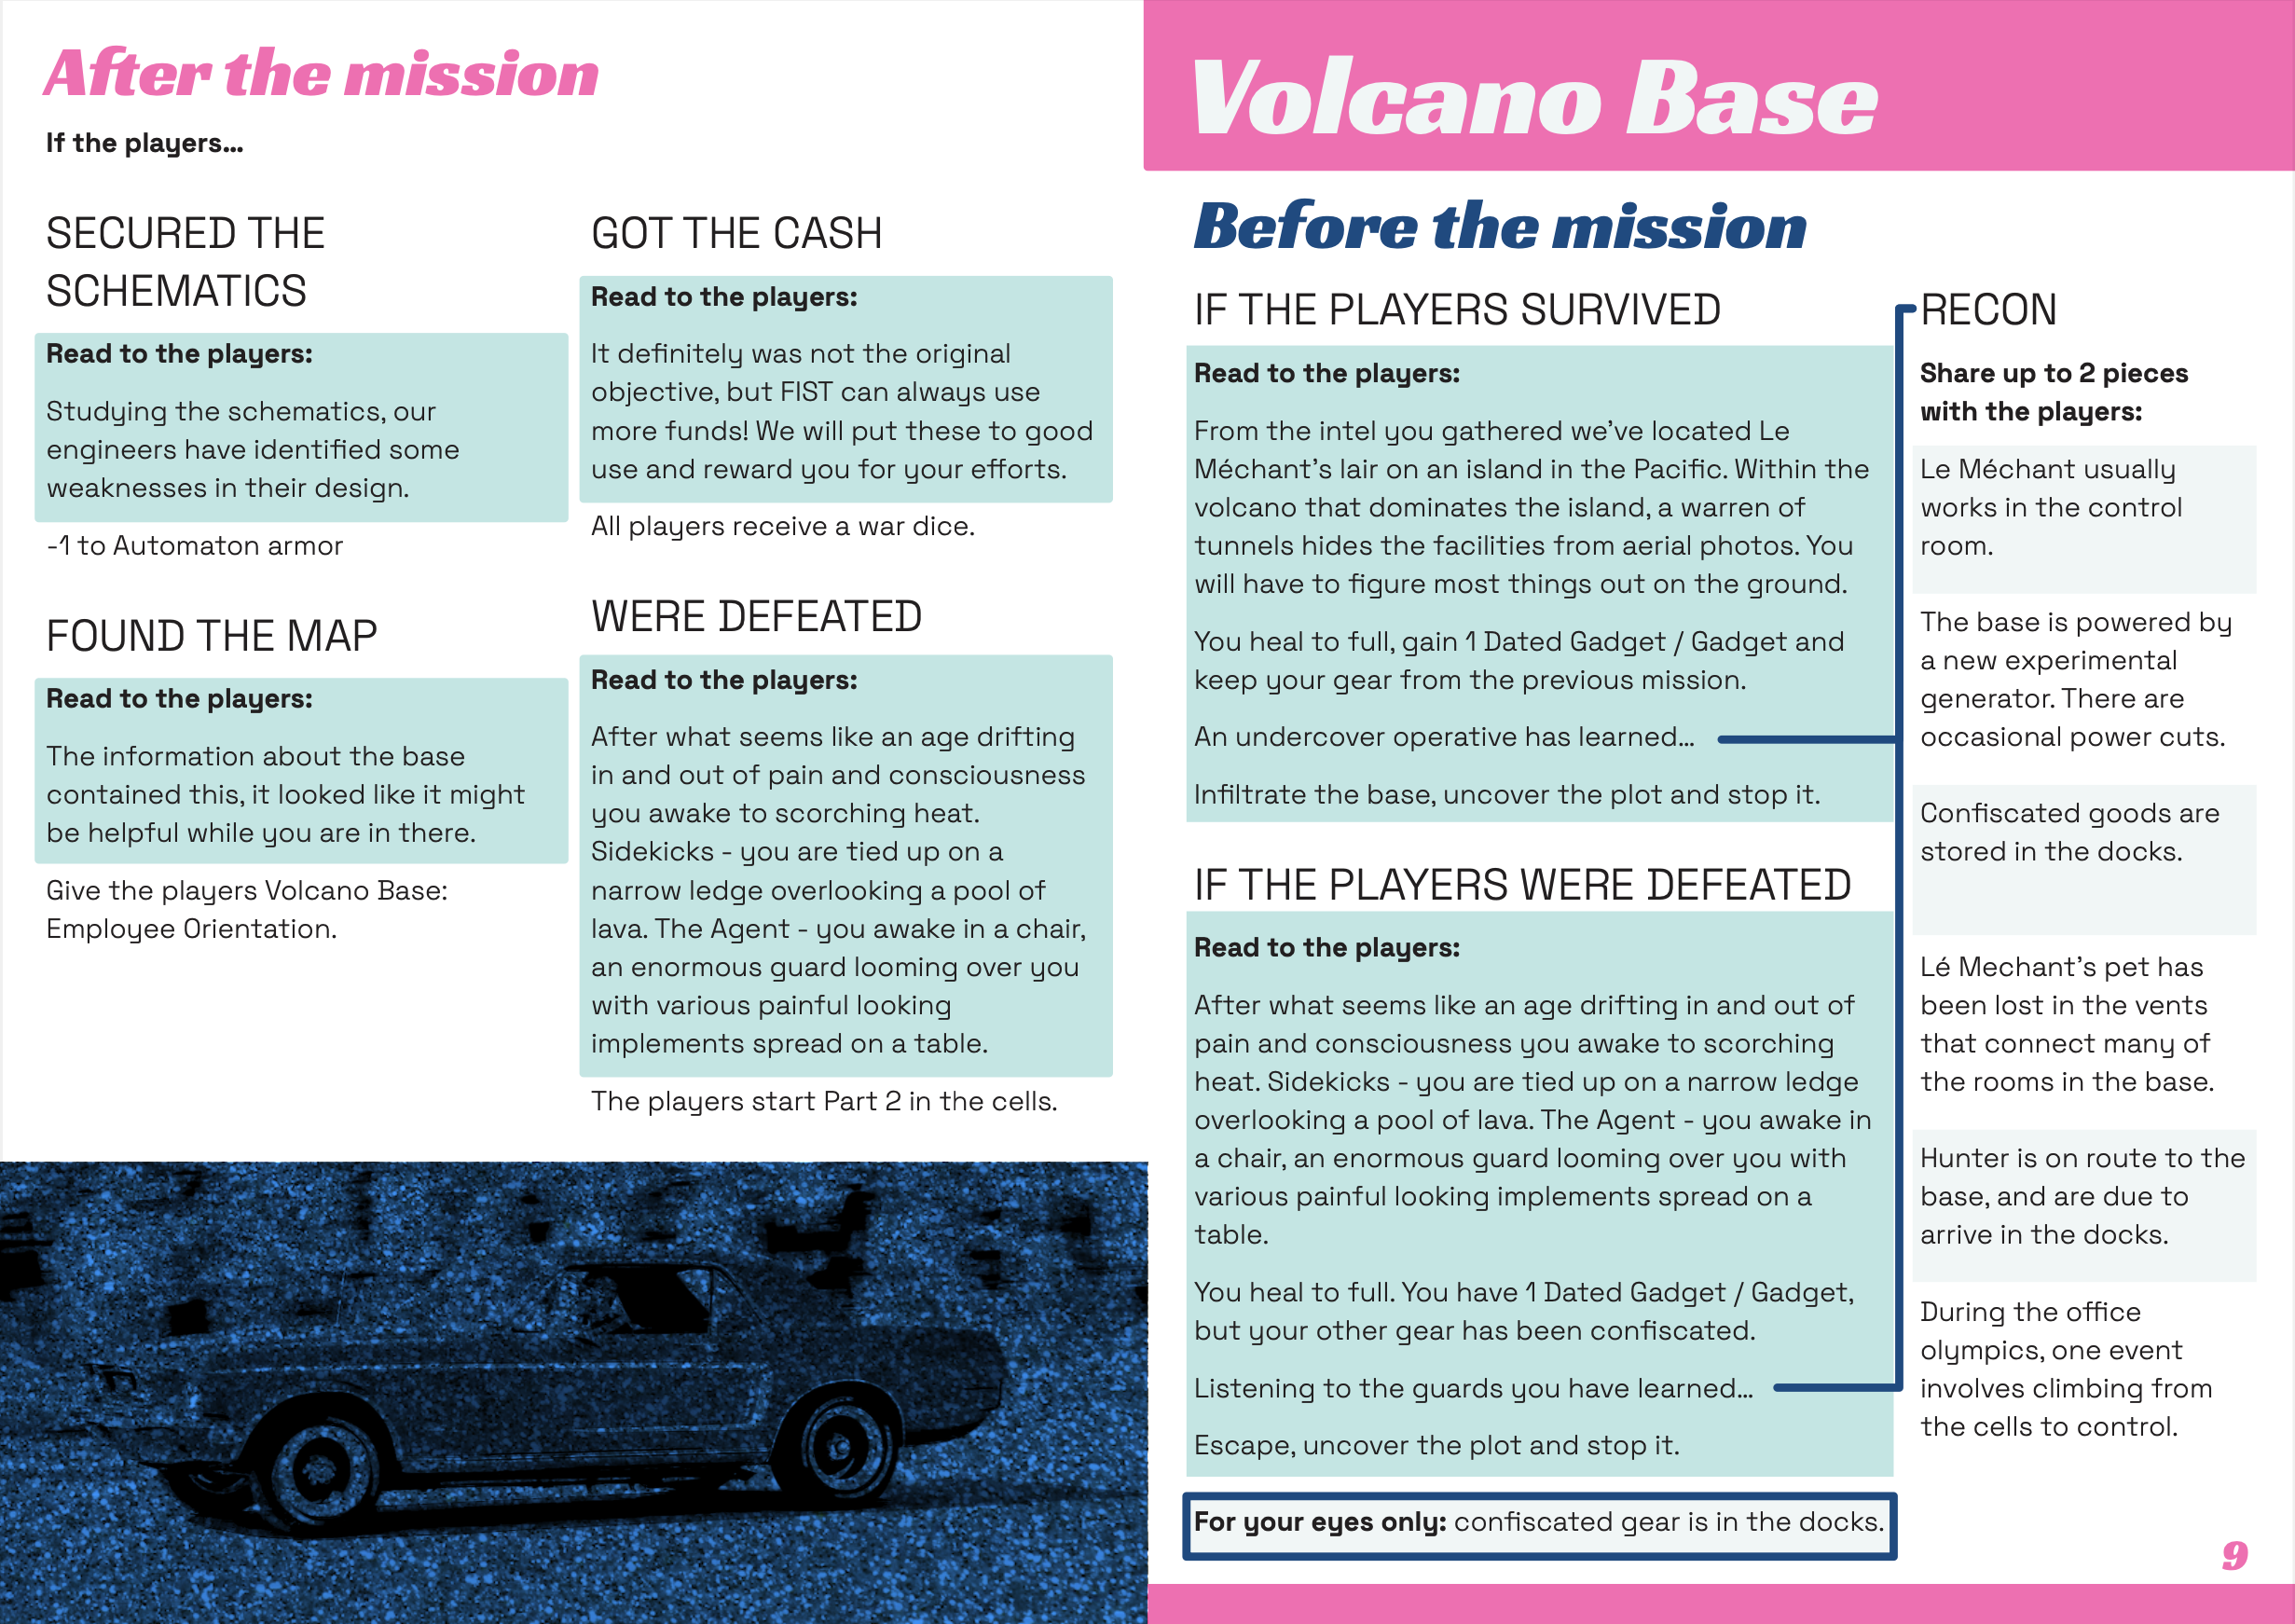 A spread shows an after the mission section listing various outcomes, and the introduction to the Volcano Base scenario.